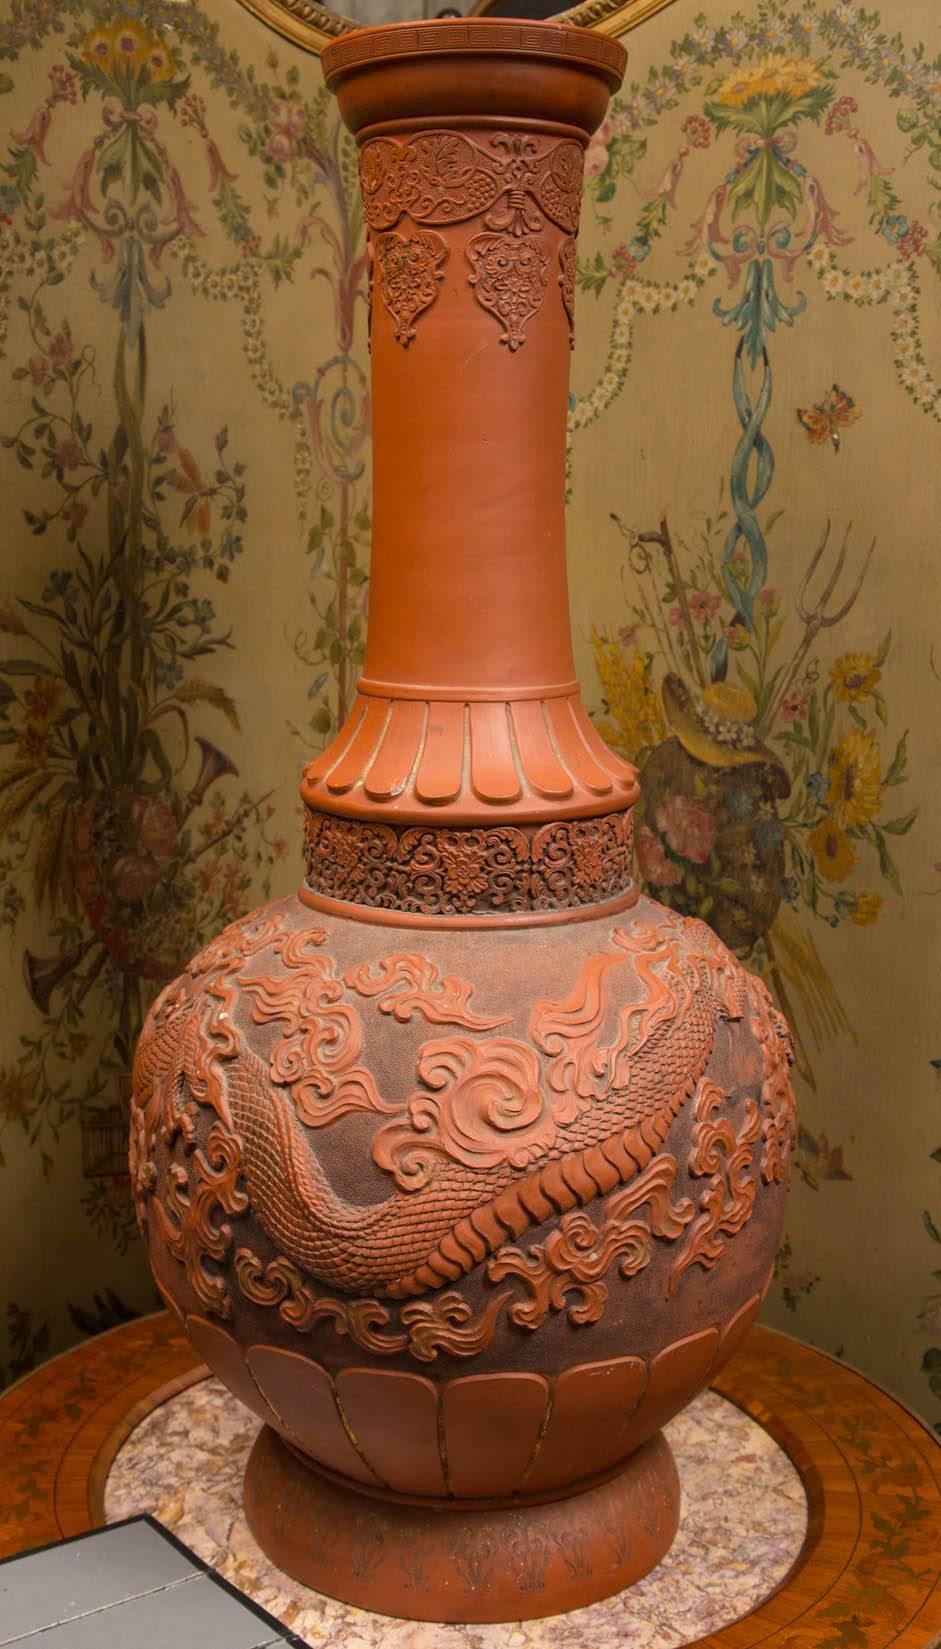 Bulbous bottoms, tall necks. Decorated with dragons, clouds and other Asian motifs.